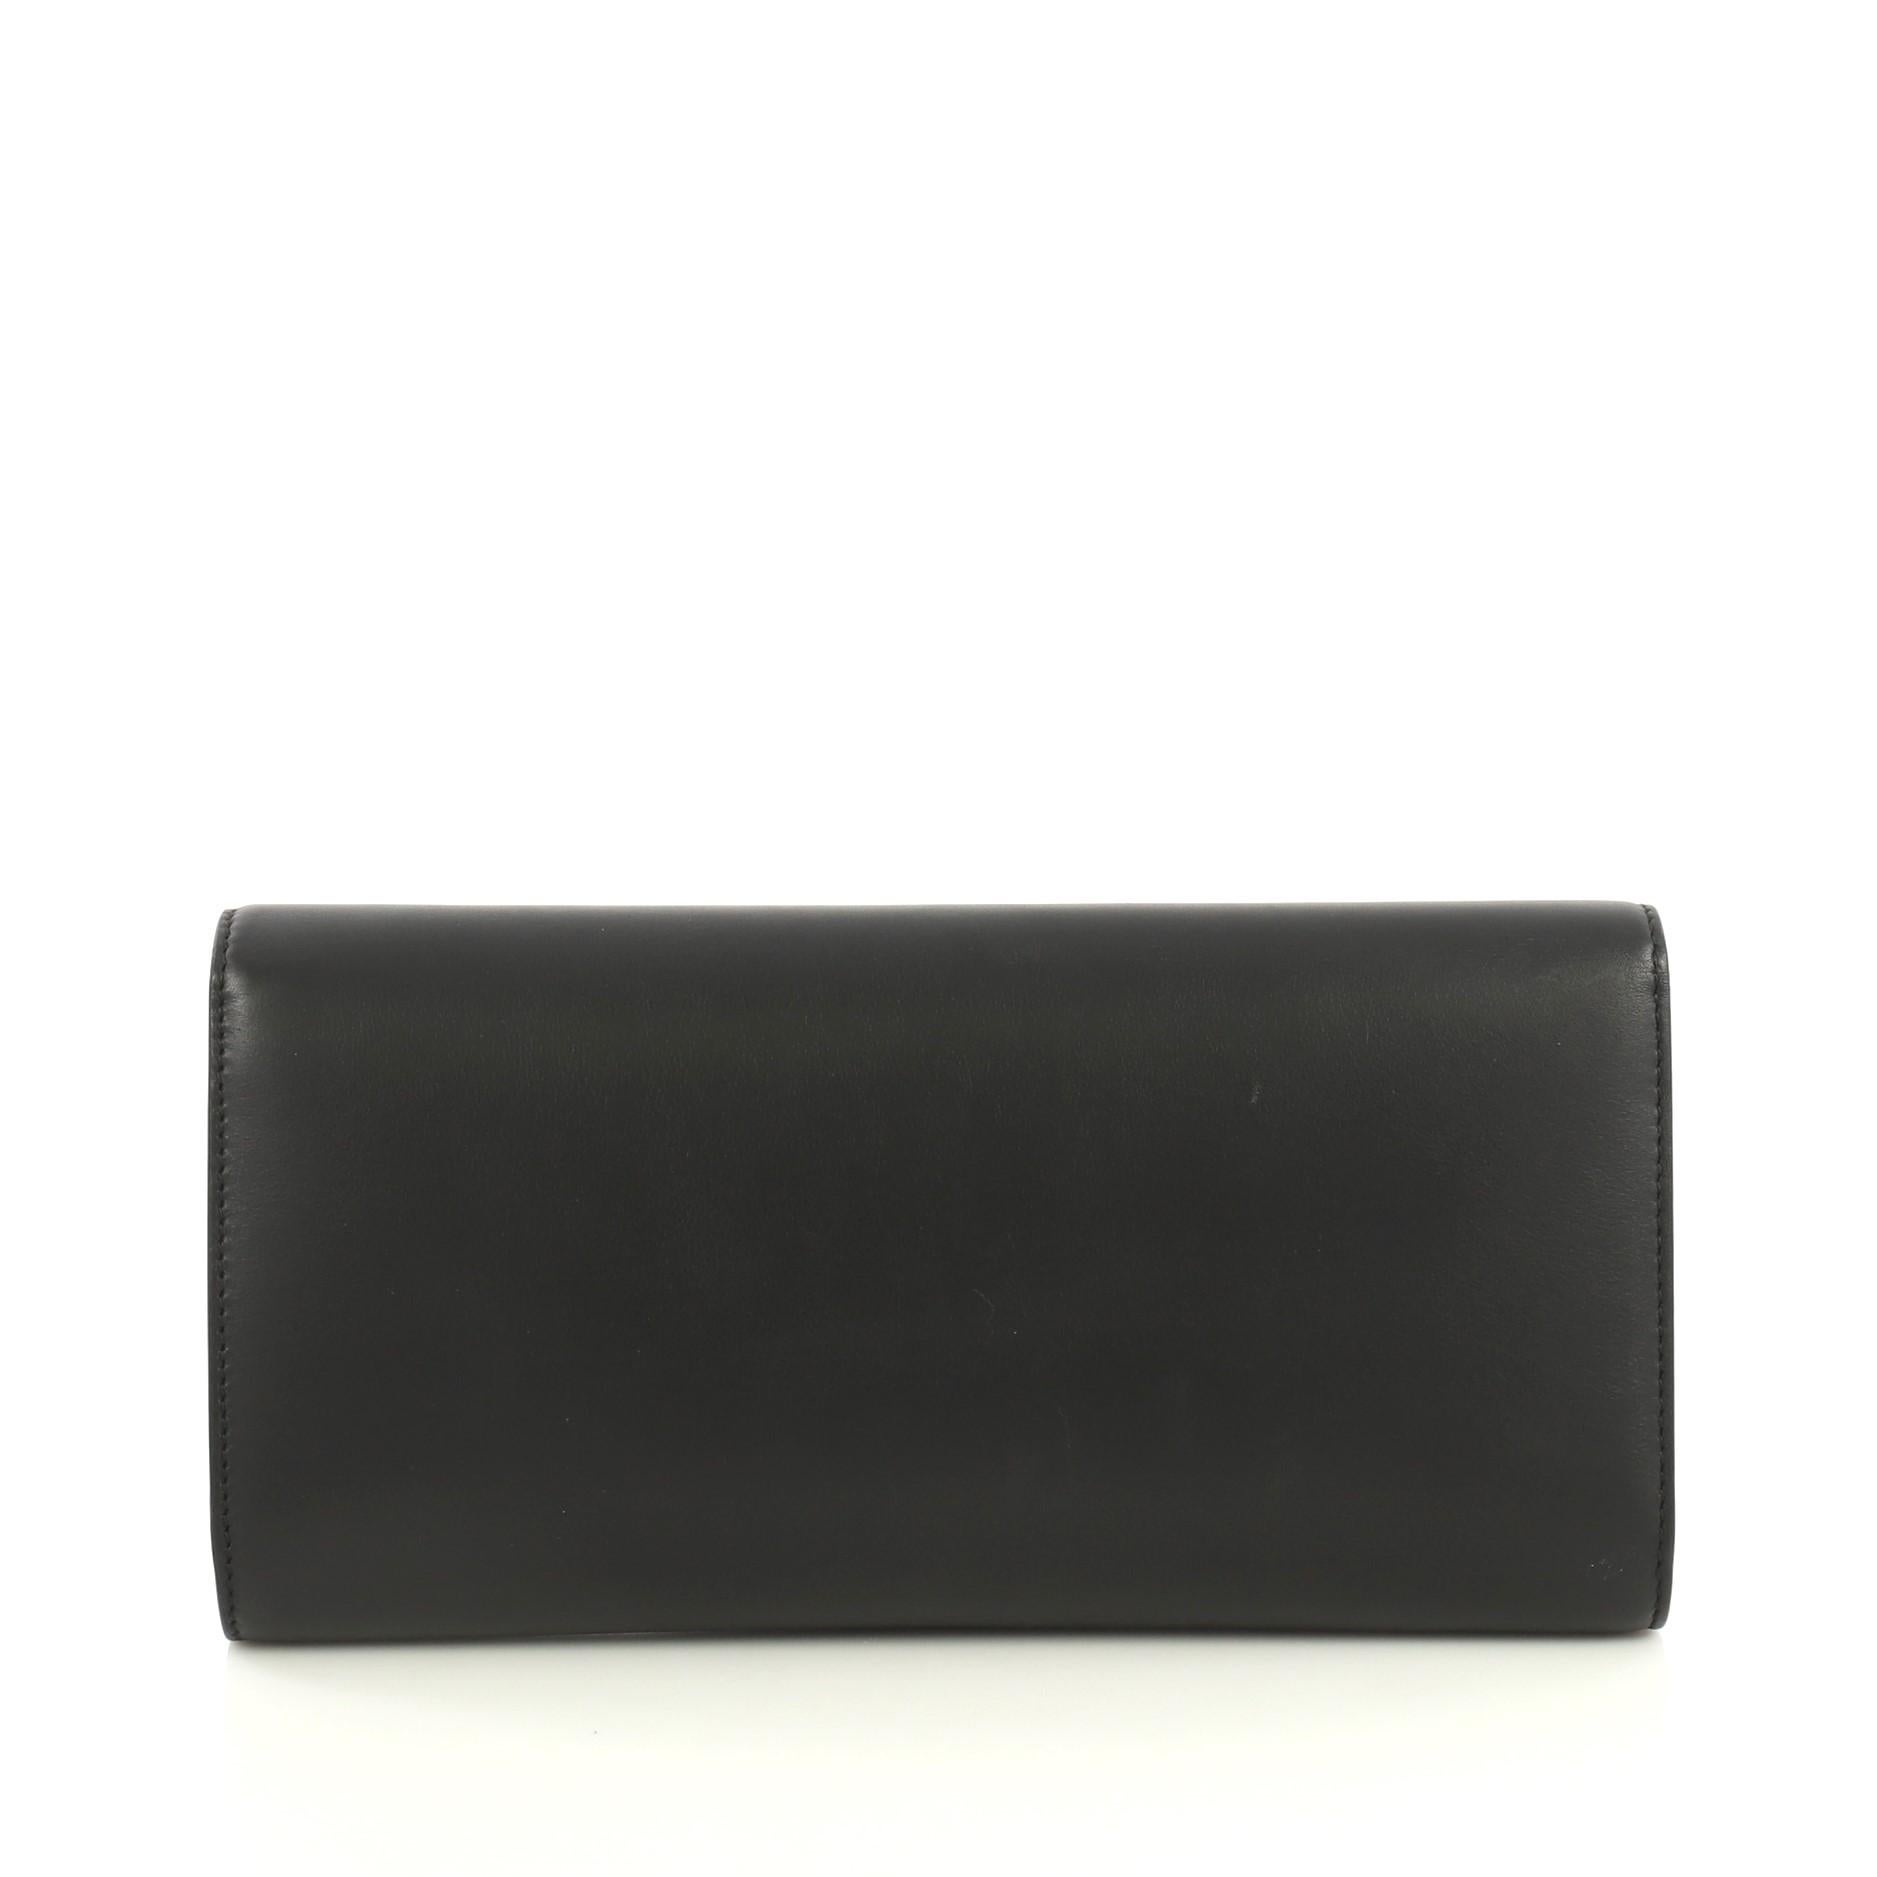 Black Gucci Pearly GG Marmont Clutch Leather